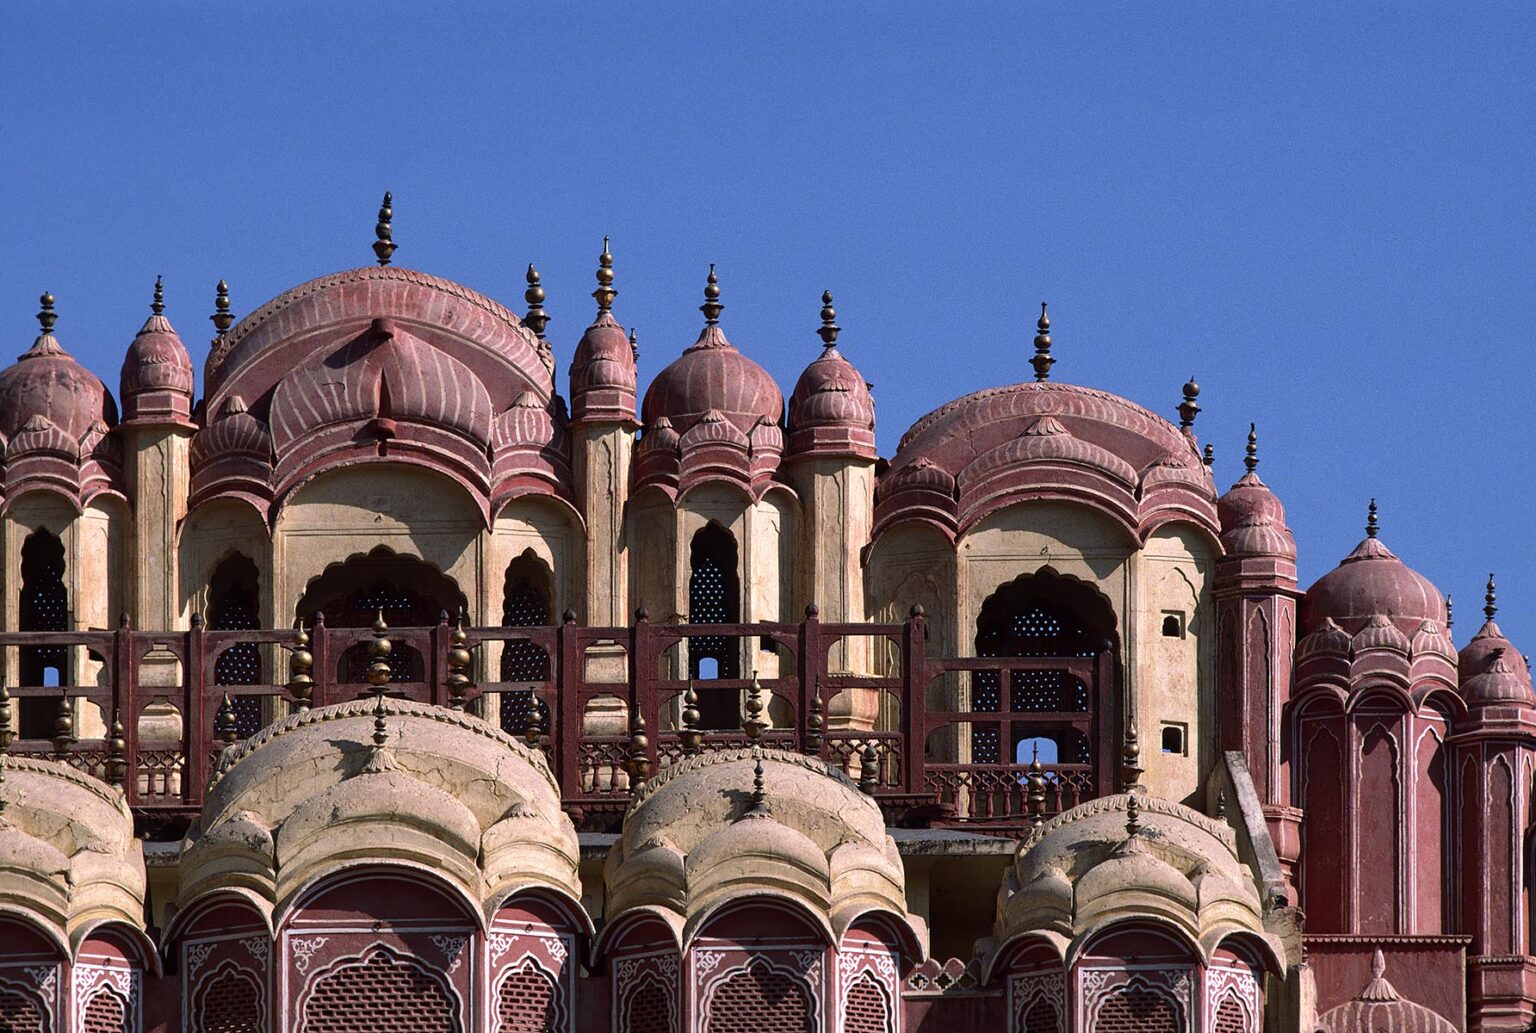 The HAWA MAHAL (PALACE of the WINDS) built in 1799 as the central landmark of JAIPUR - RAJASTHAN, INDIA